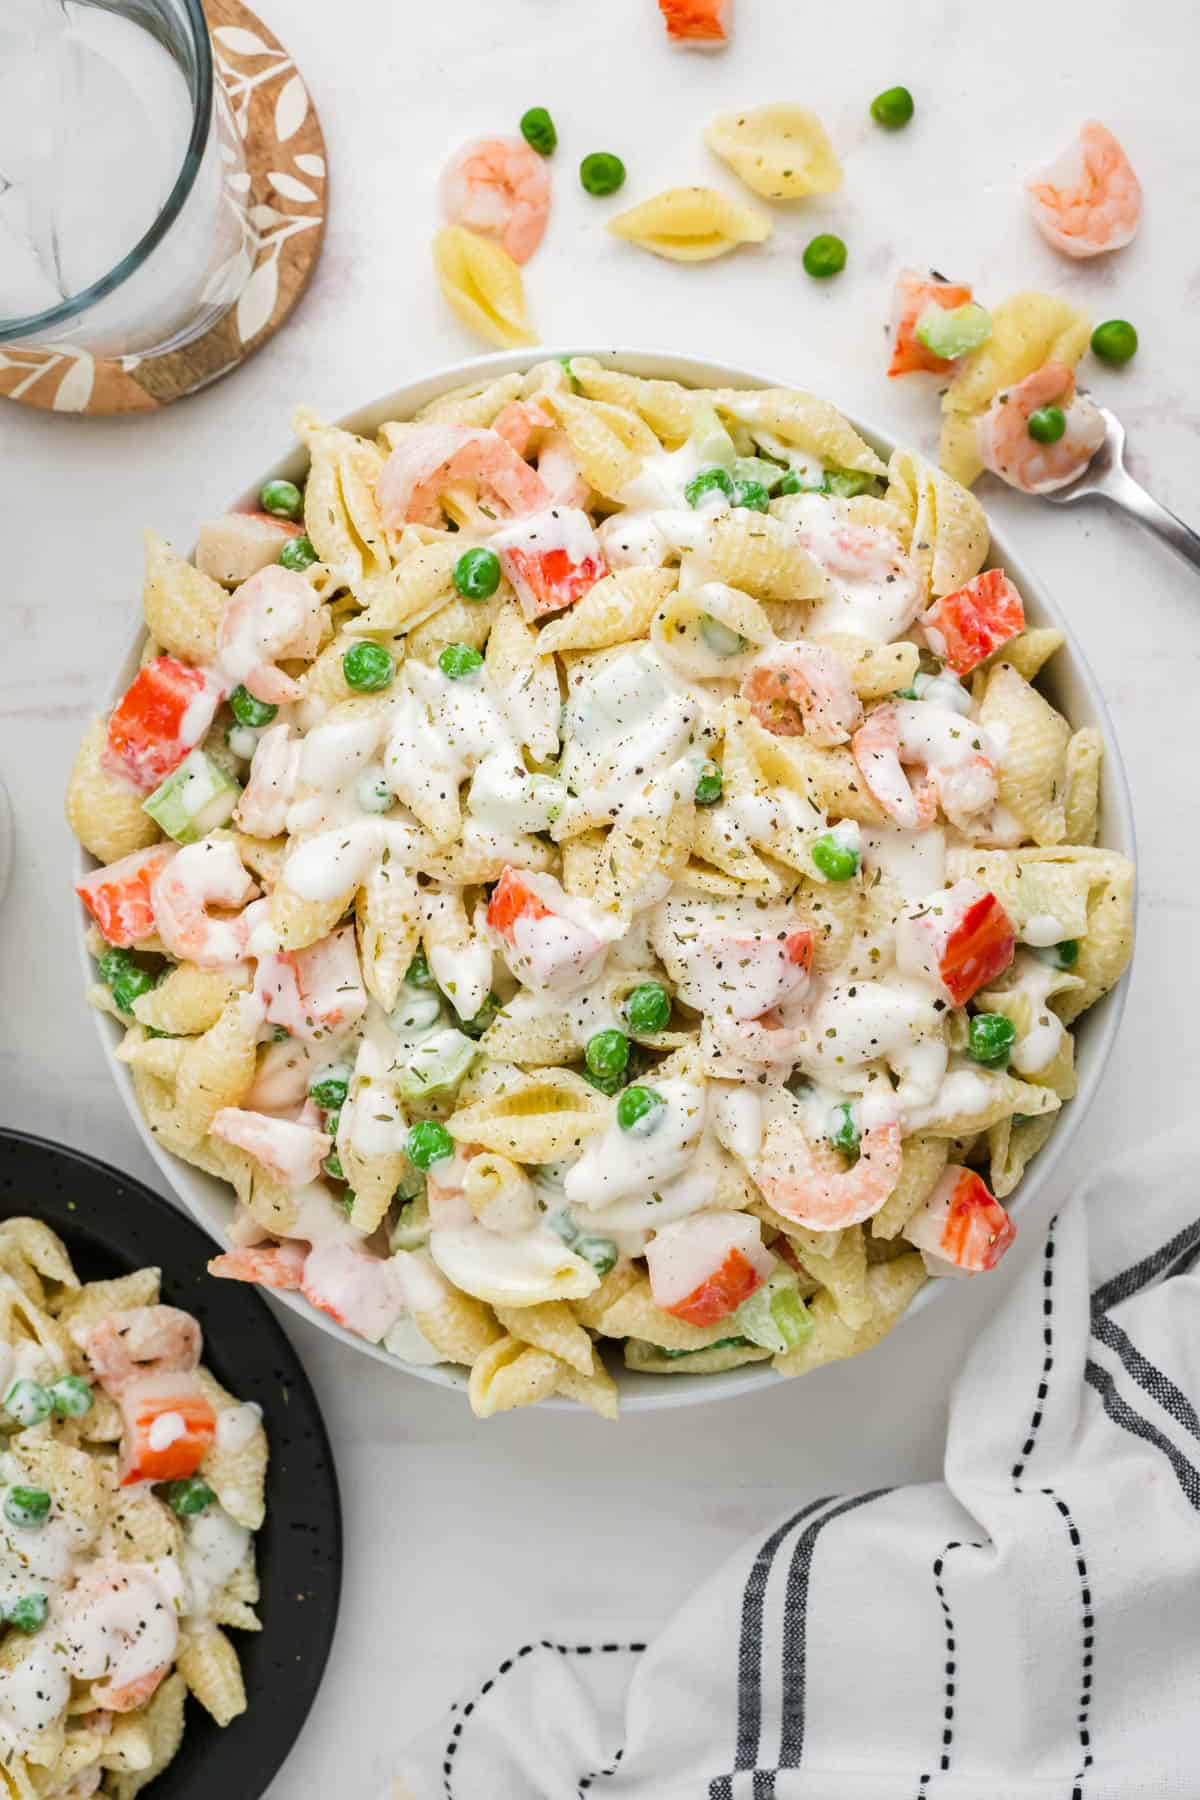 An overhead image of a large serving bowl of seafood pasta salad.